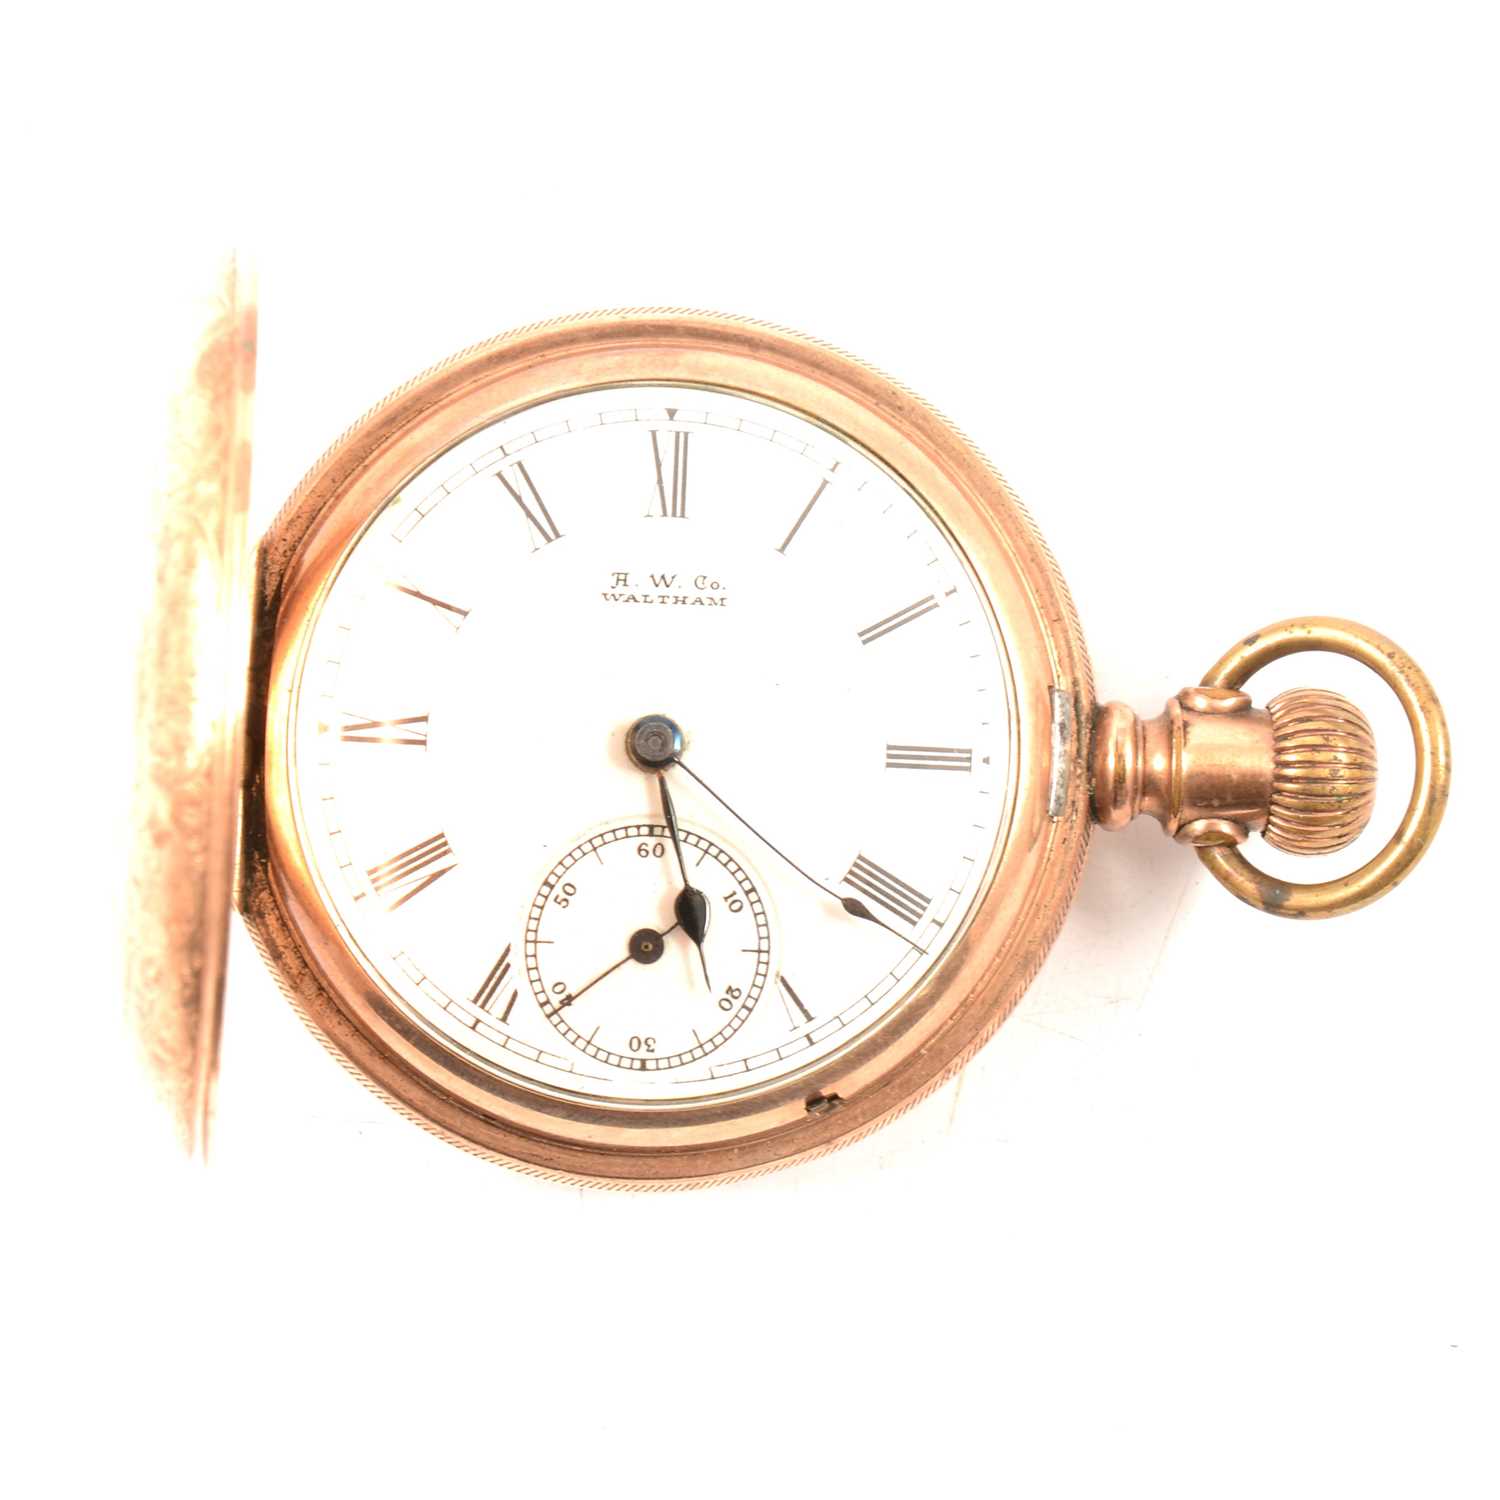 Lot 272 - H W Co. Waltham - a gold-plated full hunter pocket watch.